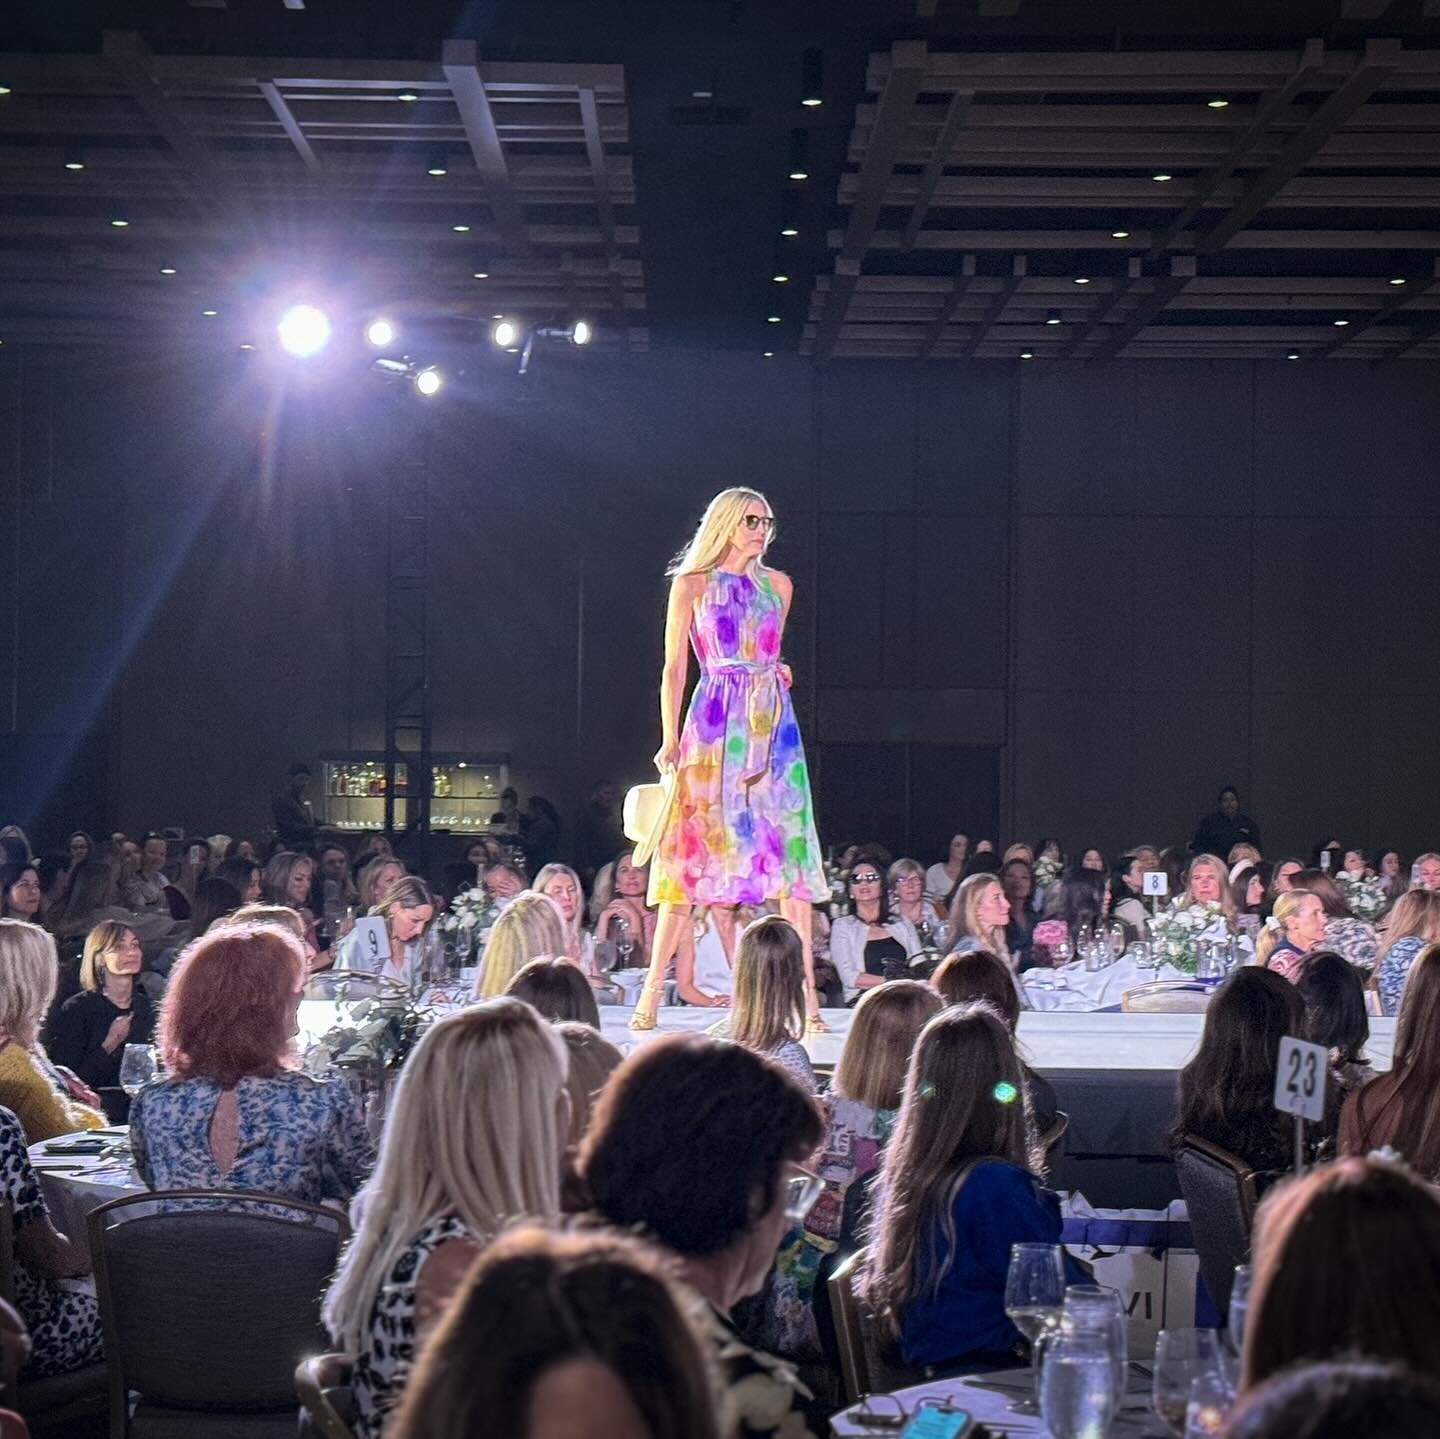 We are still reeling in excitement from Sunday&rsquo;s fashion show! Thank you to everyone who attended, donated to the auction and promoted the event. It was a huge success.

We&rsquo;ll share more about the event soon, but for now we want to highli